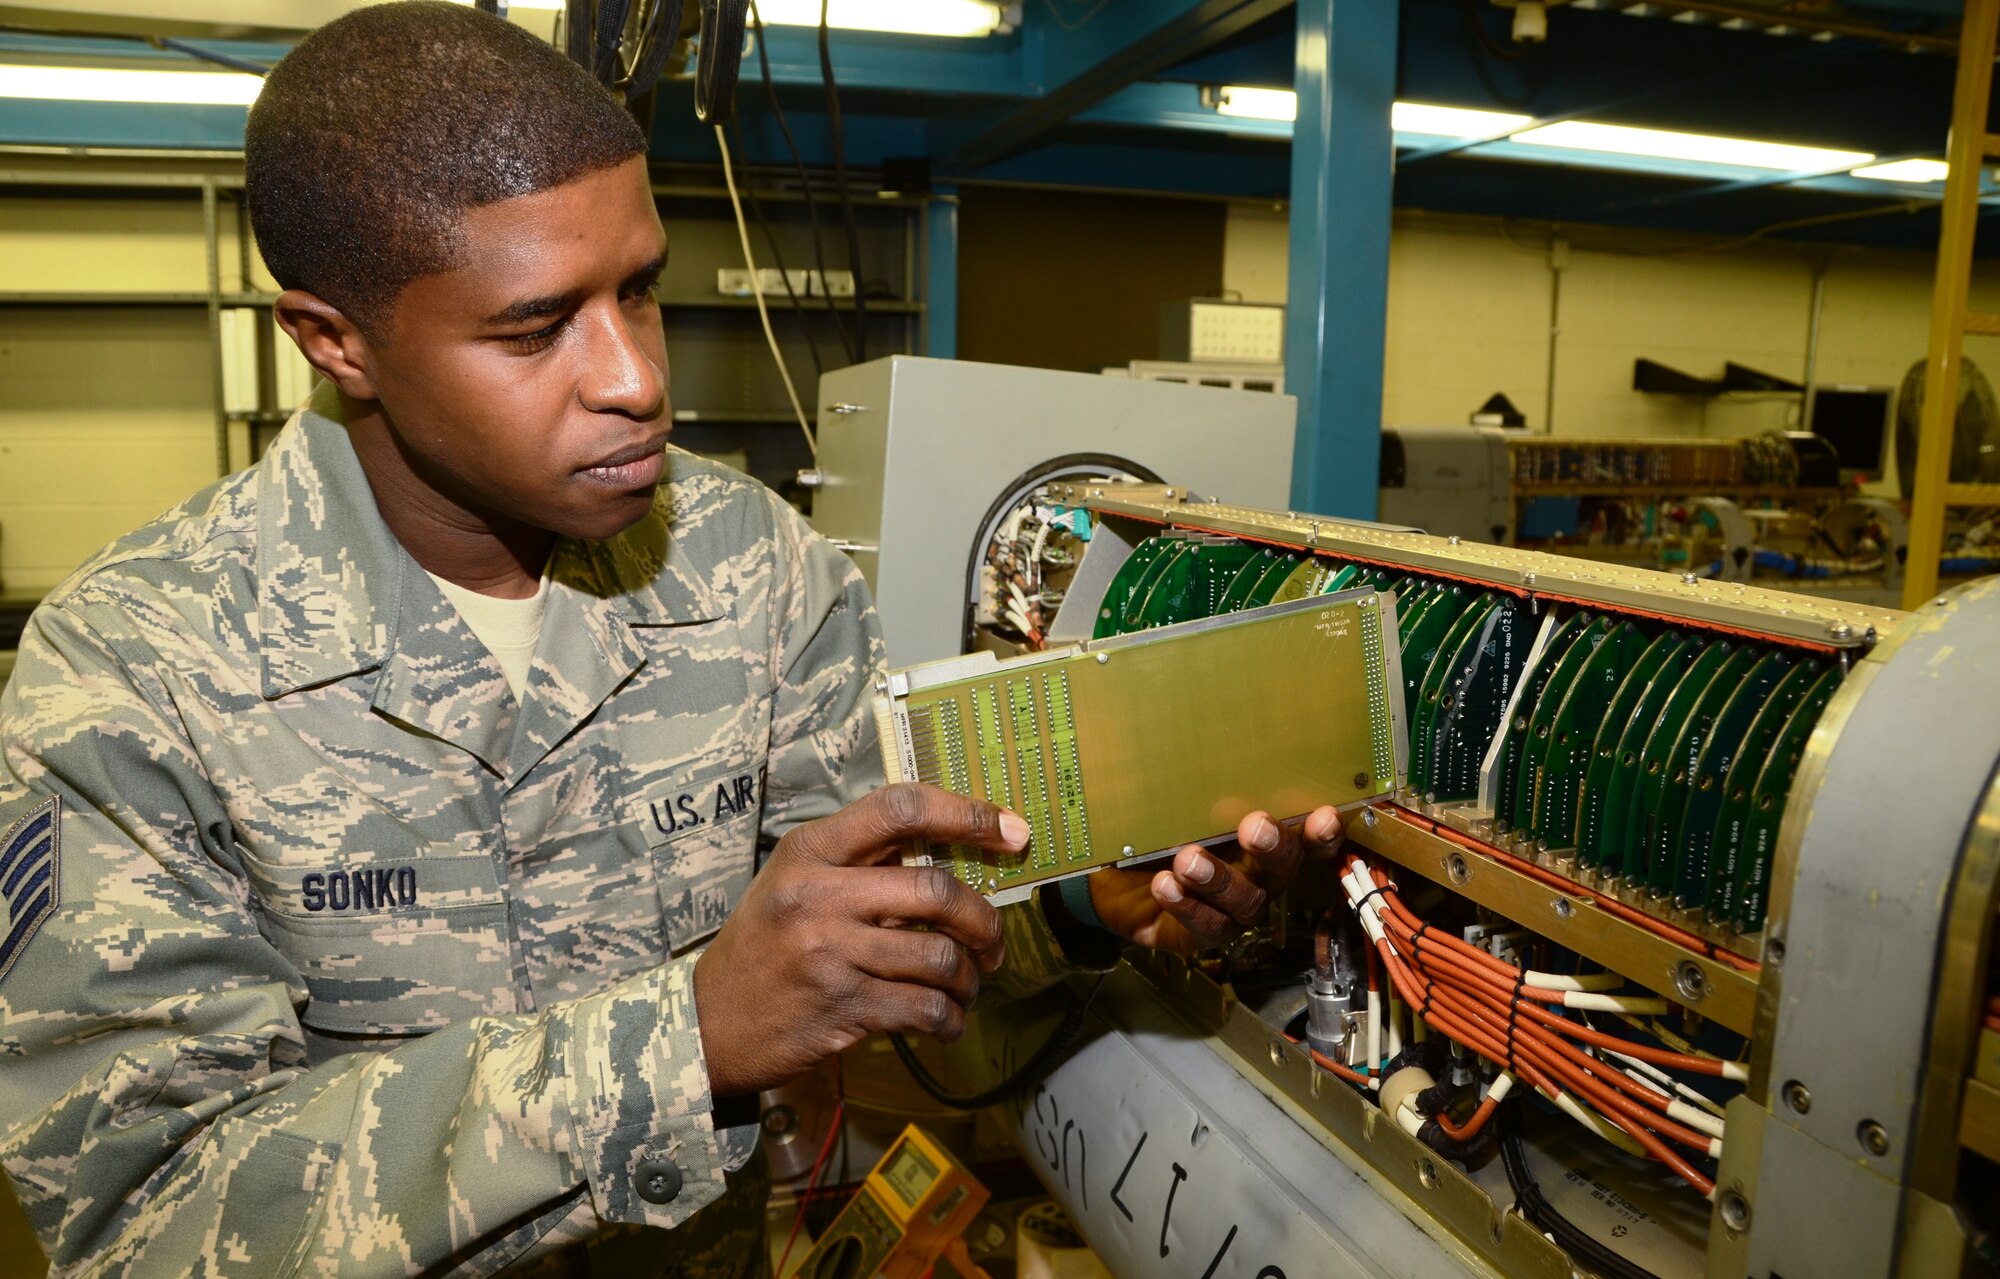 Staff Sgt. Ousseynou S. Sonko, avionics sensors and electronic warfare systems mechanic in the 175th Maintenance Squadron, resets a card on an electronic countermeasures pod. (National Guard photo by Master Sgt. Ed Bard)